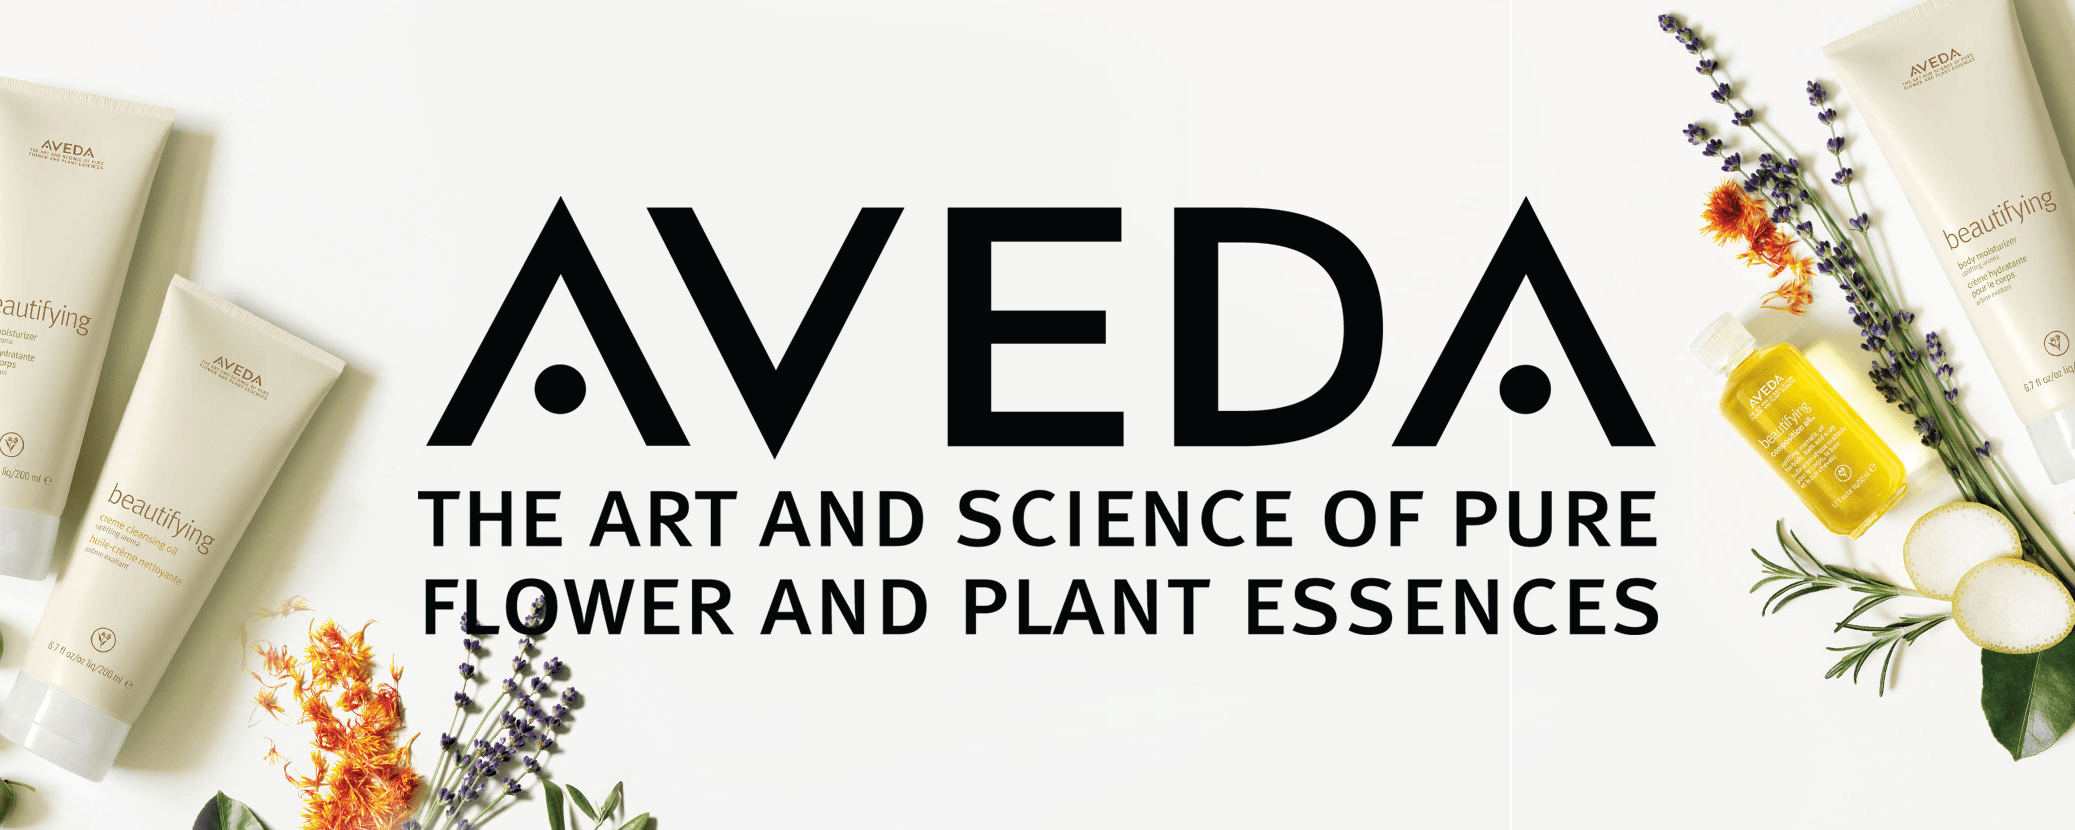 Aveda Logo - Aveda Products with Floral Background. Progressions Spa & Salon